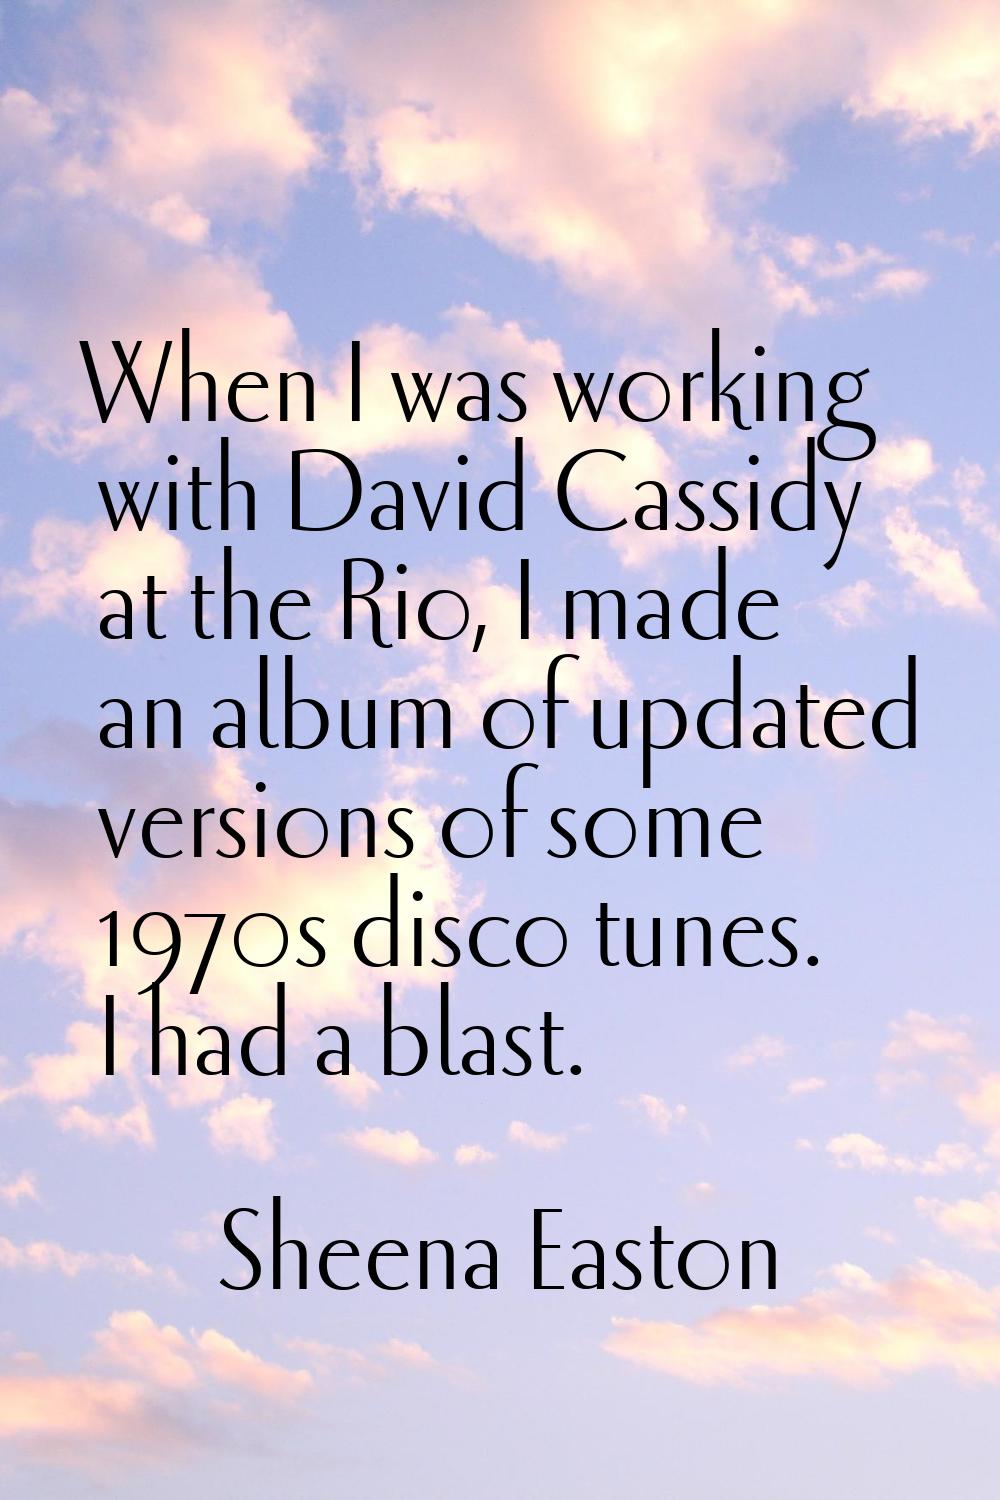 When I was working with David Cassidy at the Rio, I made an album of updated versions of some 1970s